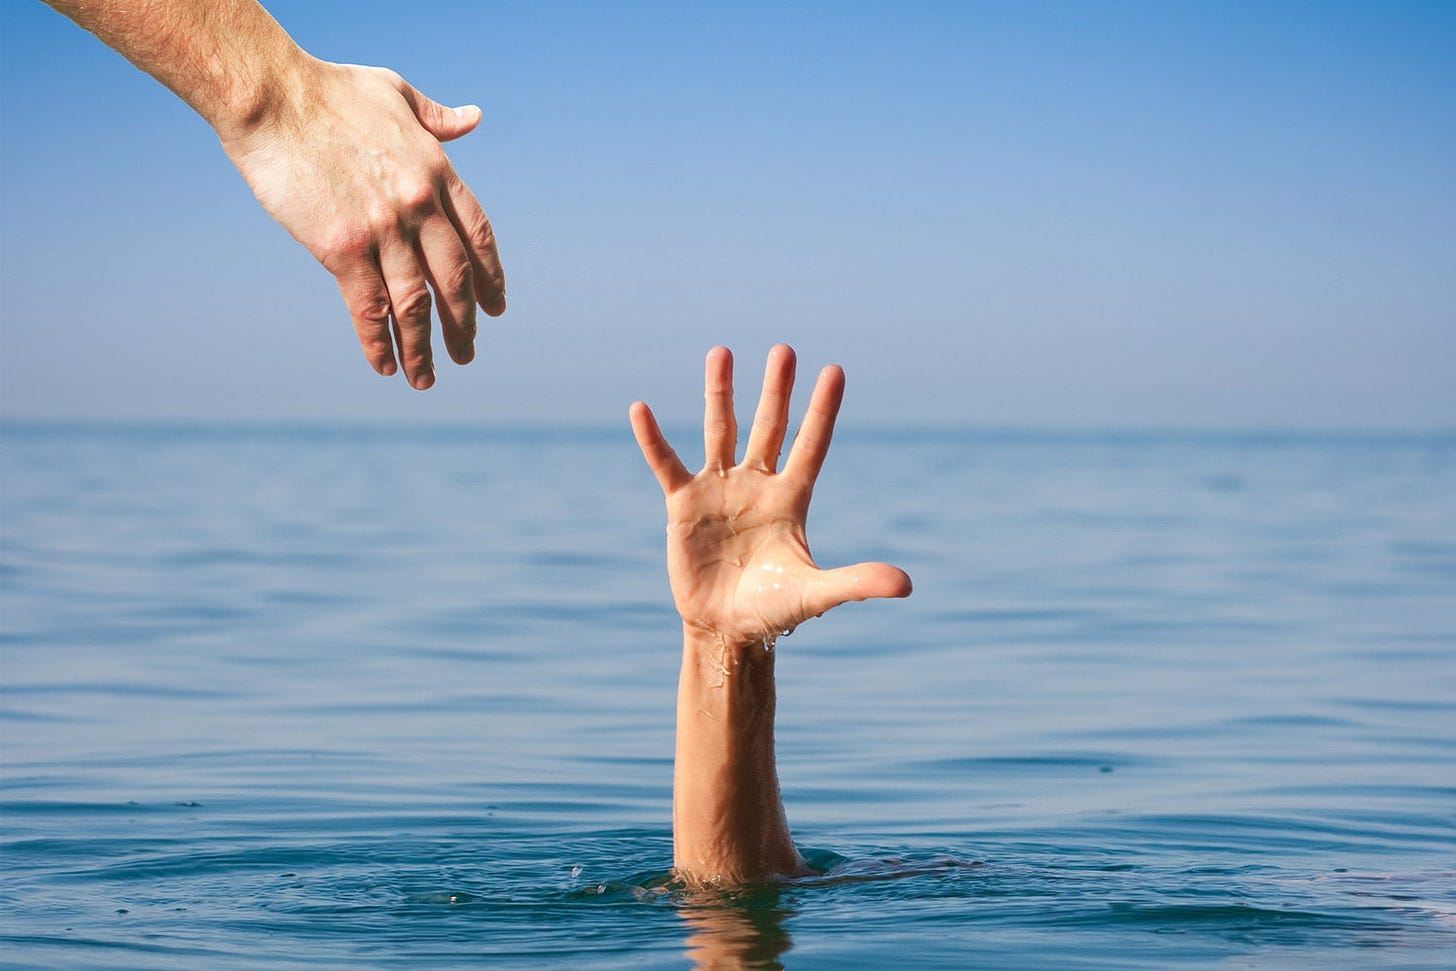 Hand of a drowning person reaching out of the water. Another hand from above offers help.